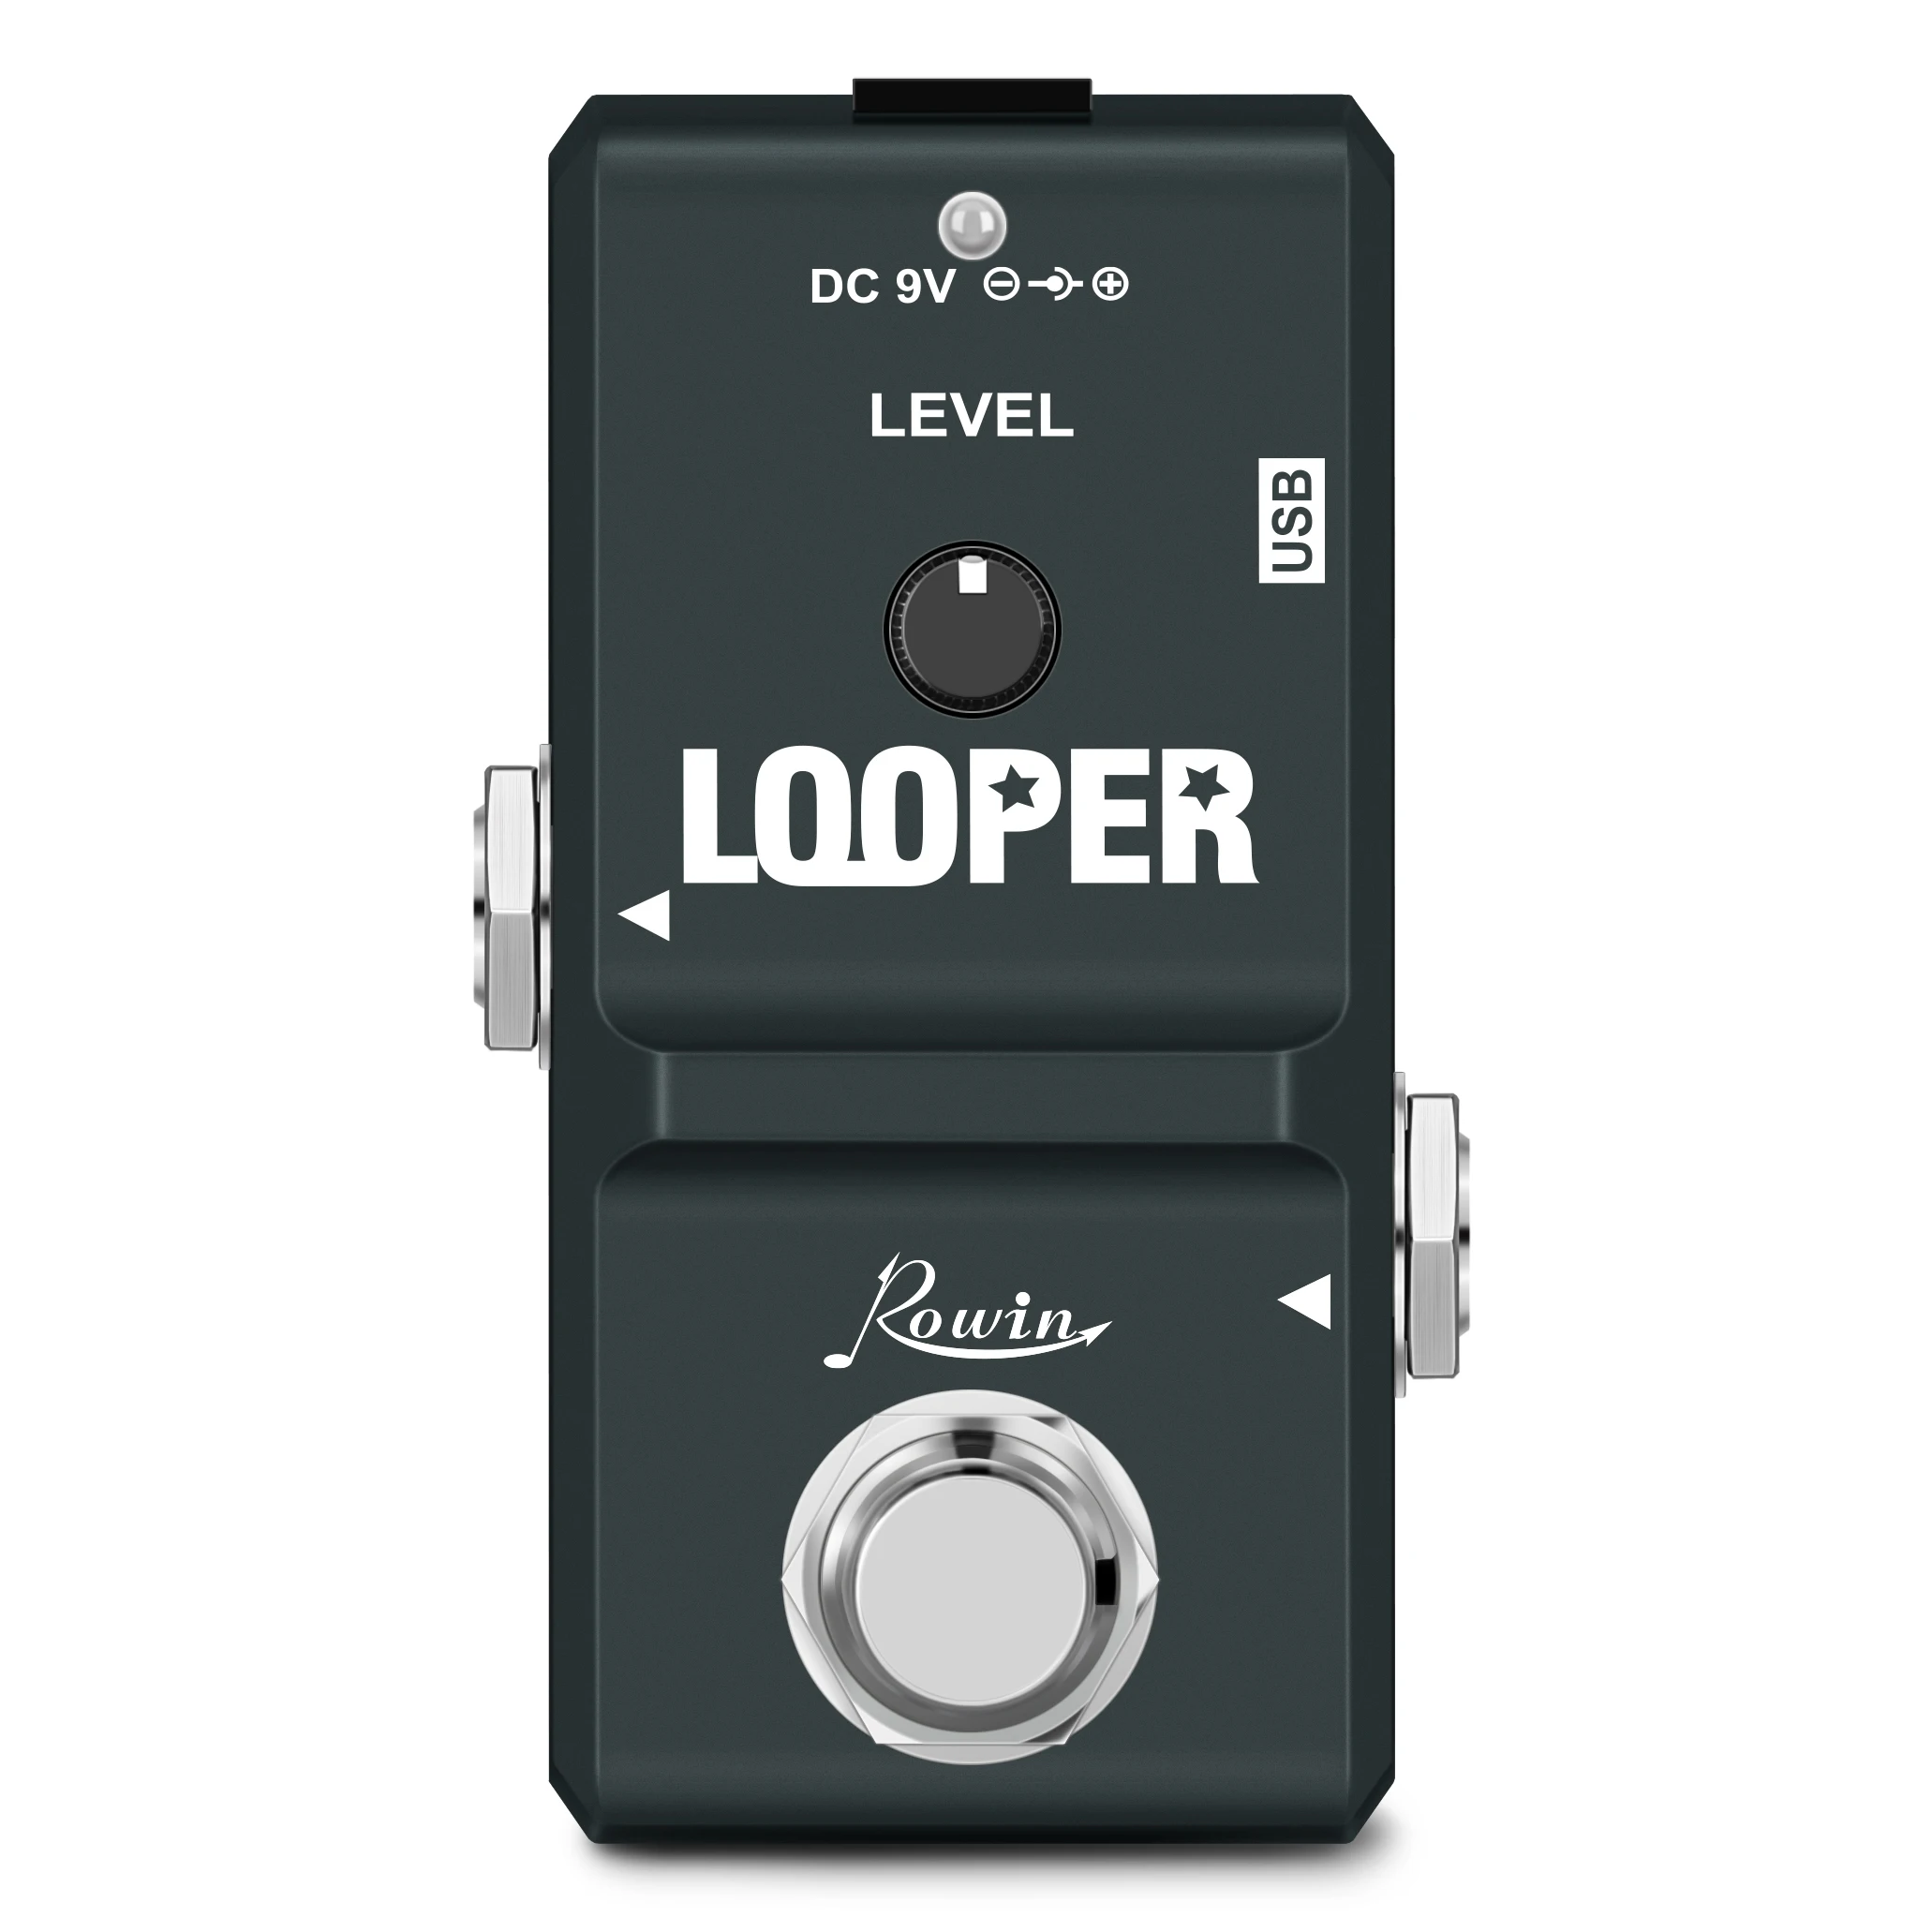 

Rowin LN-332 48K Looper Electric Guitar Effect Loop Pedal 10 Minutes of Looping Unlimited Overdubs USB Port True Bypass